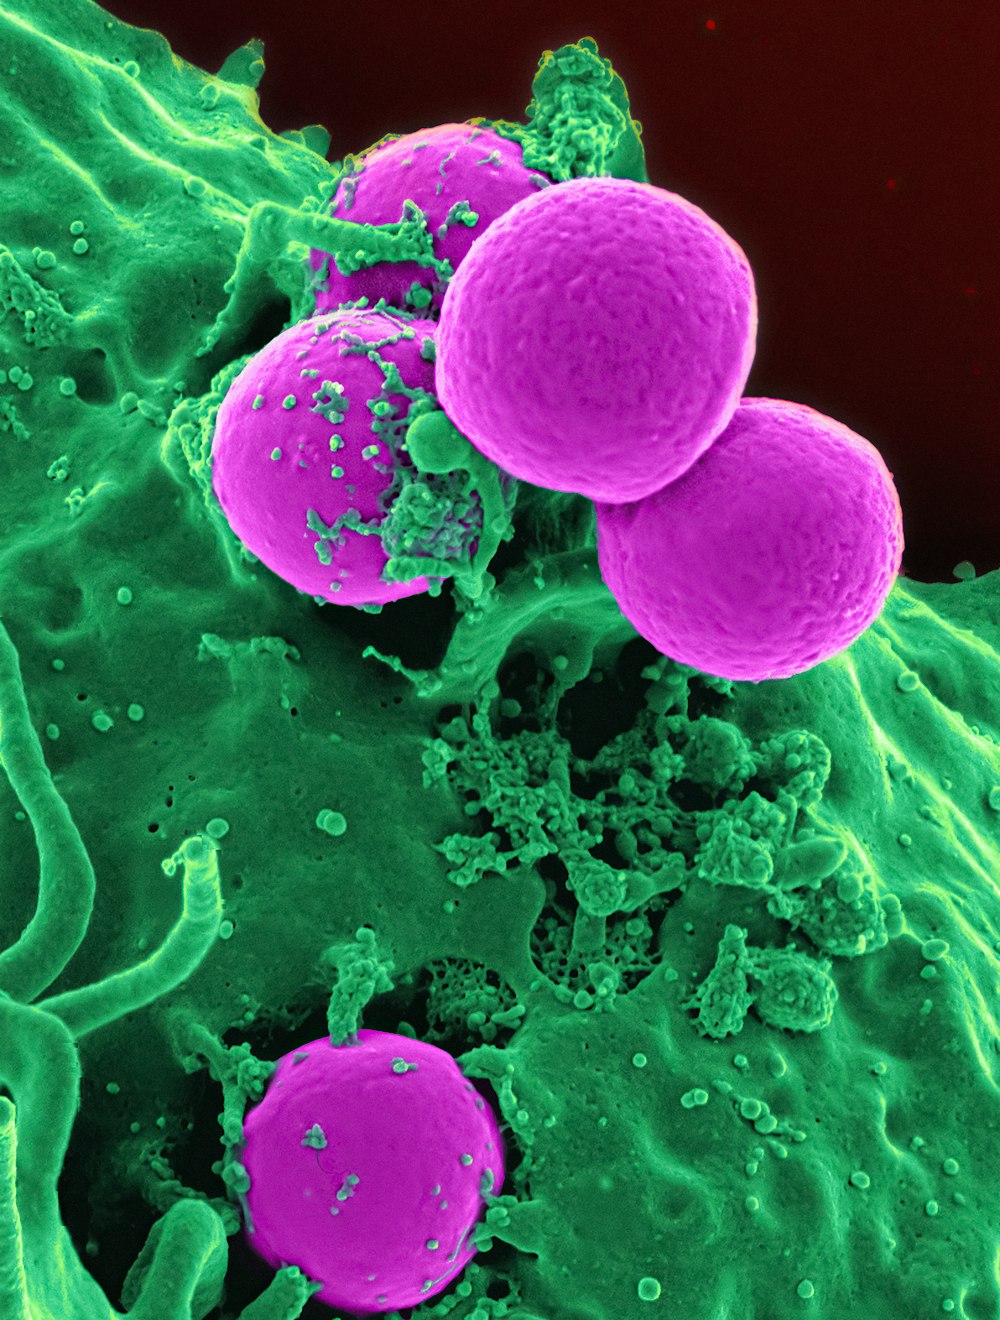 a group of purple and green cells in a blood vessel